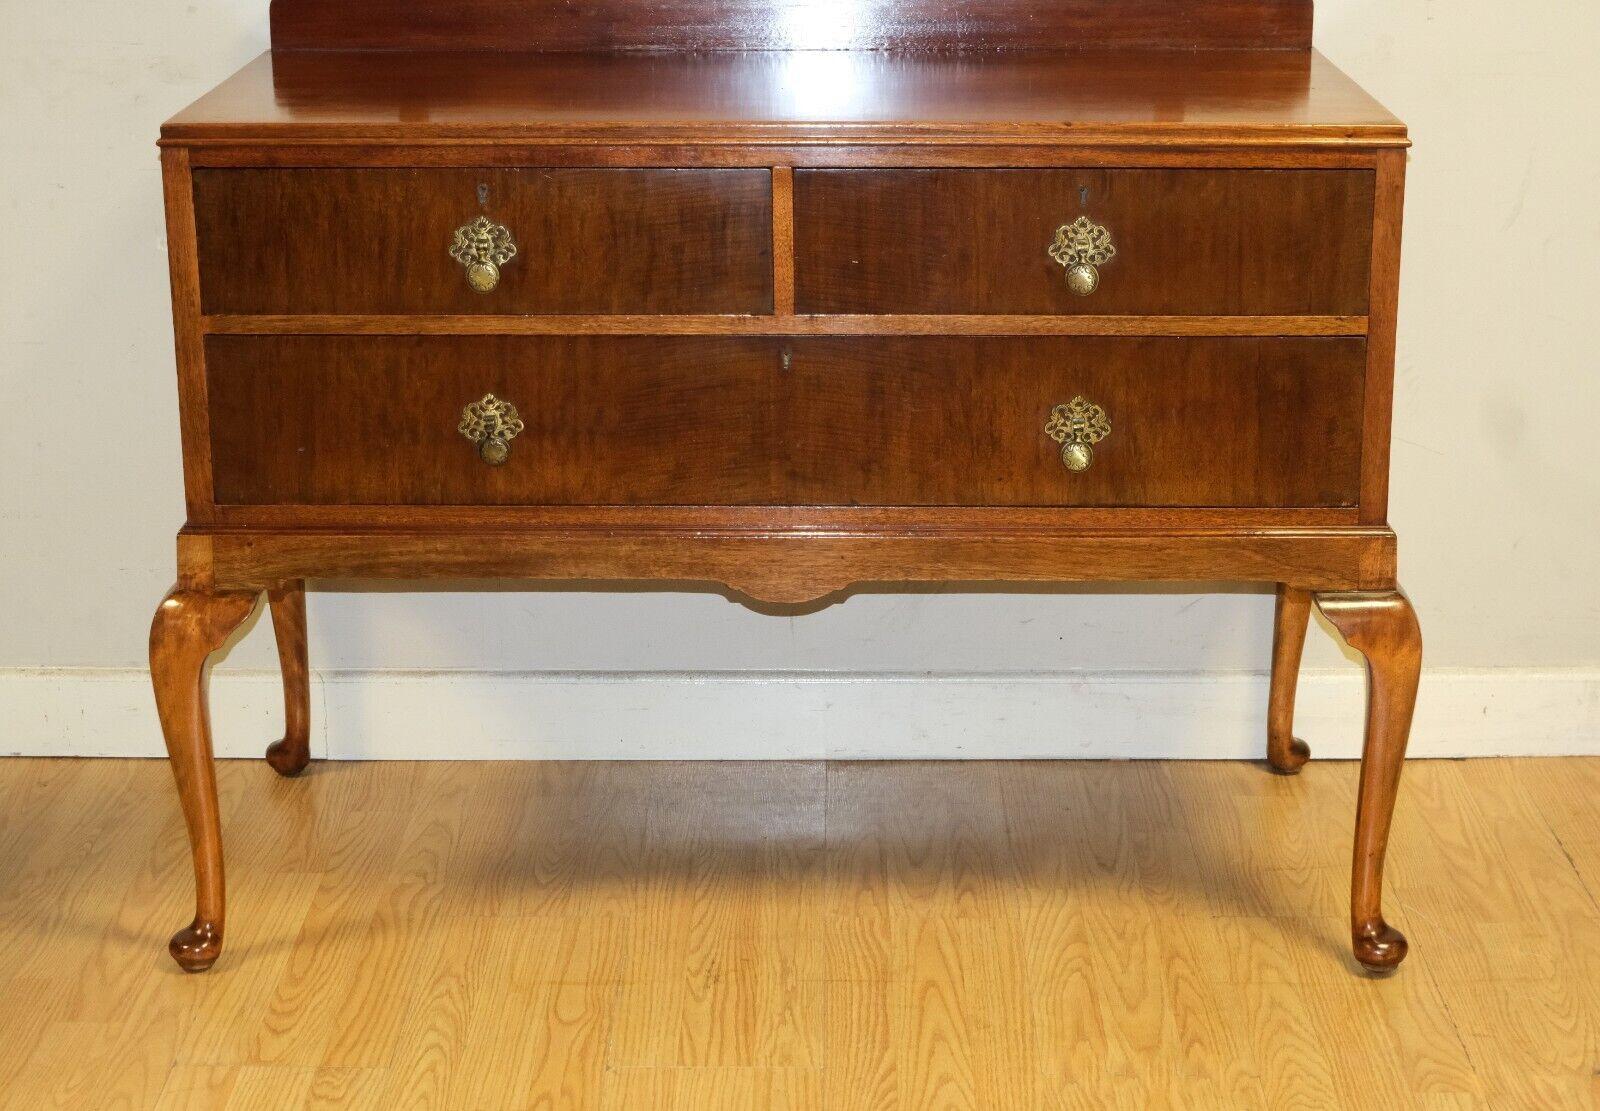 LOVELY EARLY 20TH CENTURY HARDWOOD DRESSiNG TABLE RAISED ON CABRIOLE LEGS For Sale 4